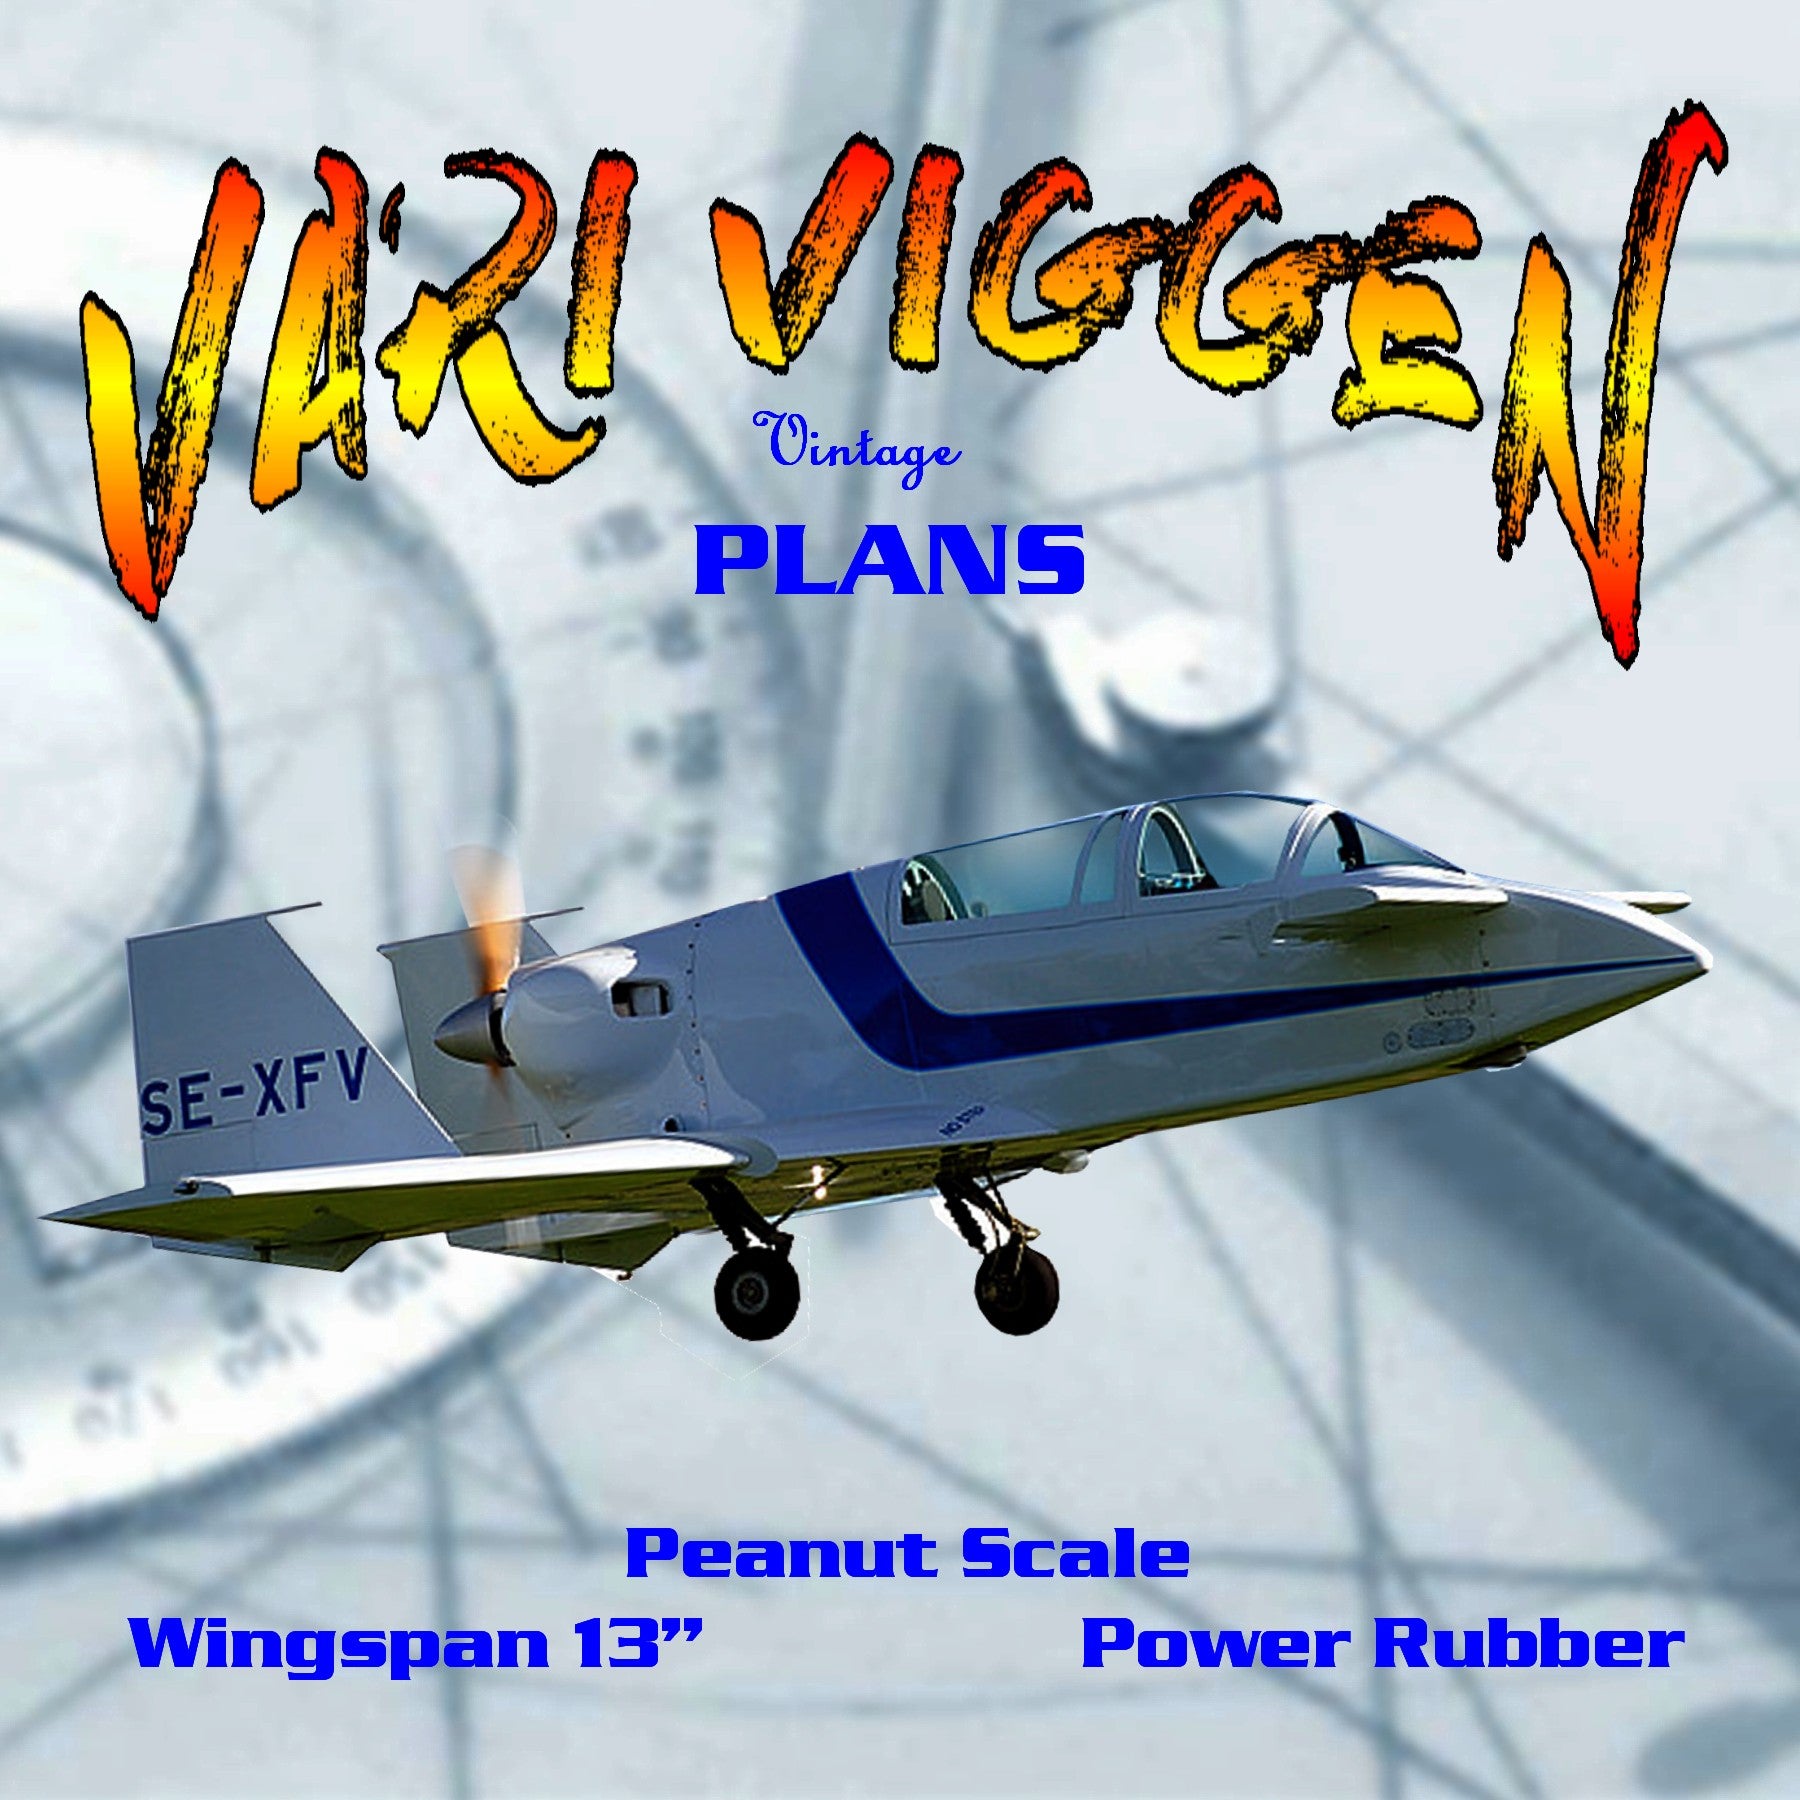 full size printed plans peanut scale " vari viggen " excellent flier. guaranteed to cause heads to turn